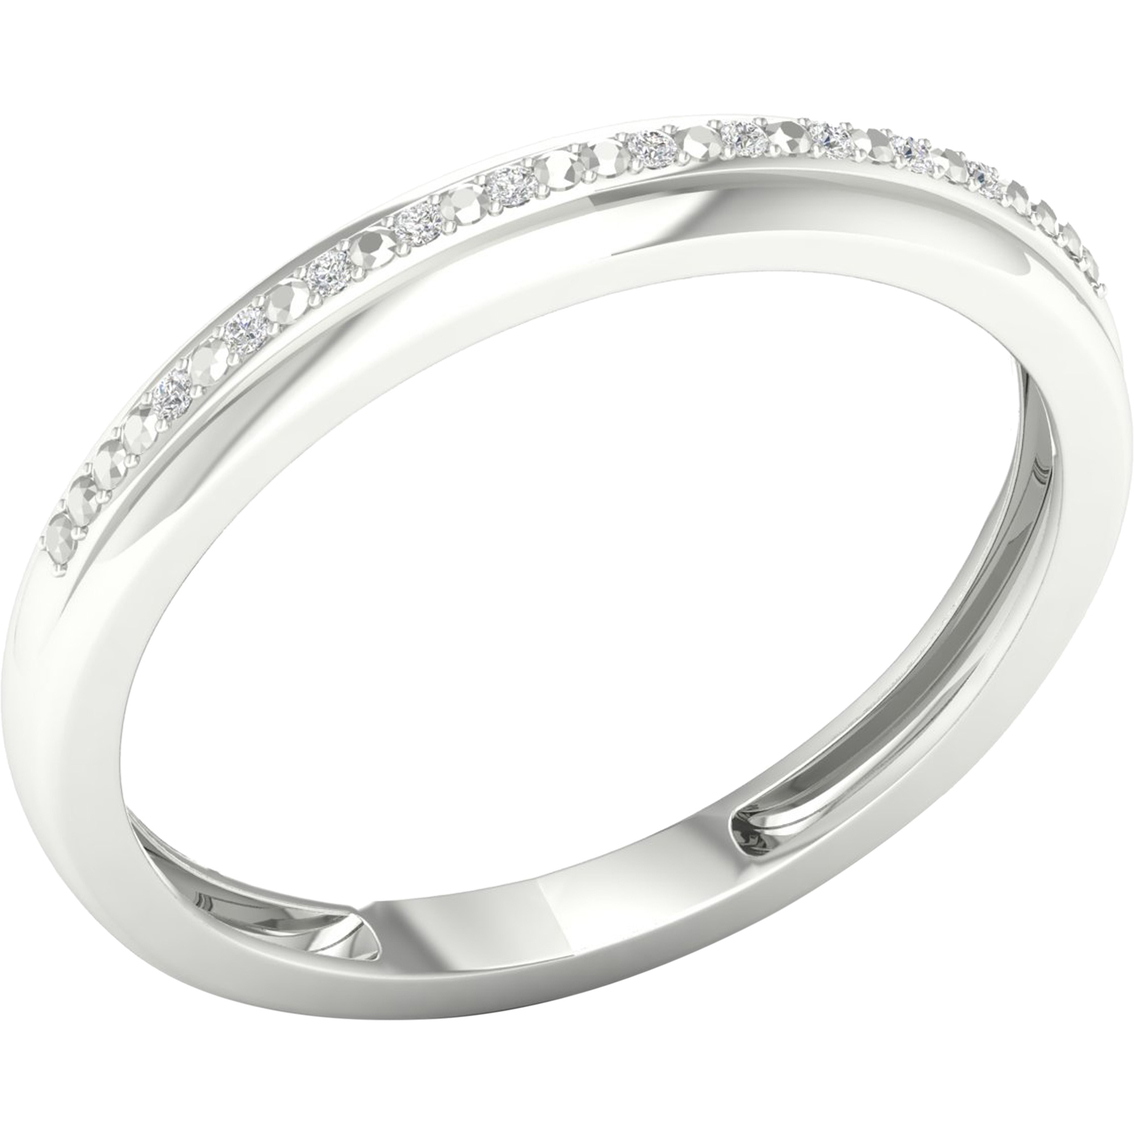 10K White Gold Diamond Accent Band - Image 2 of 4